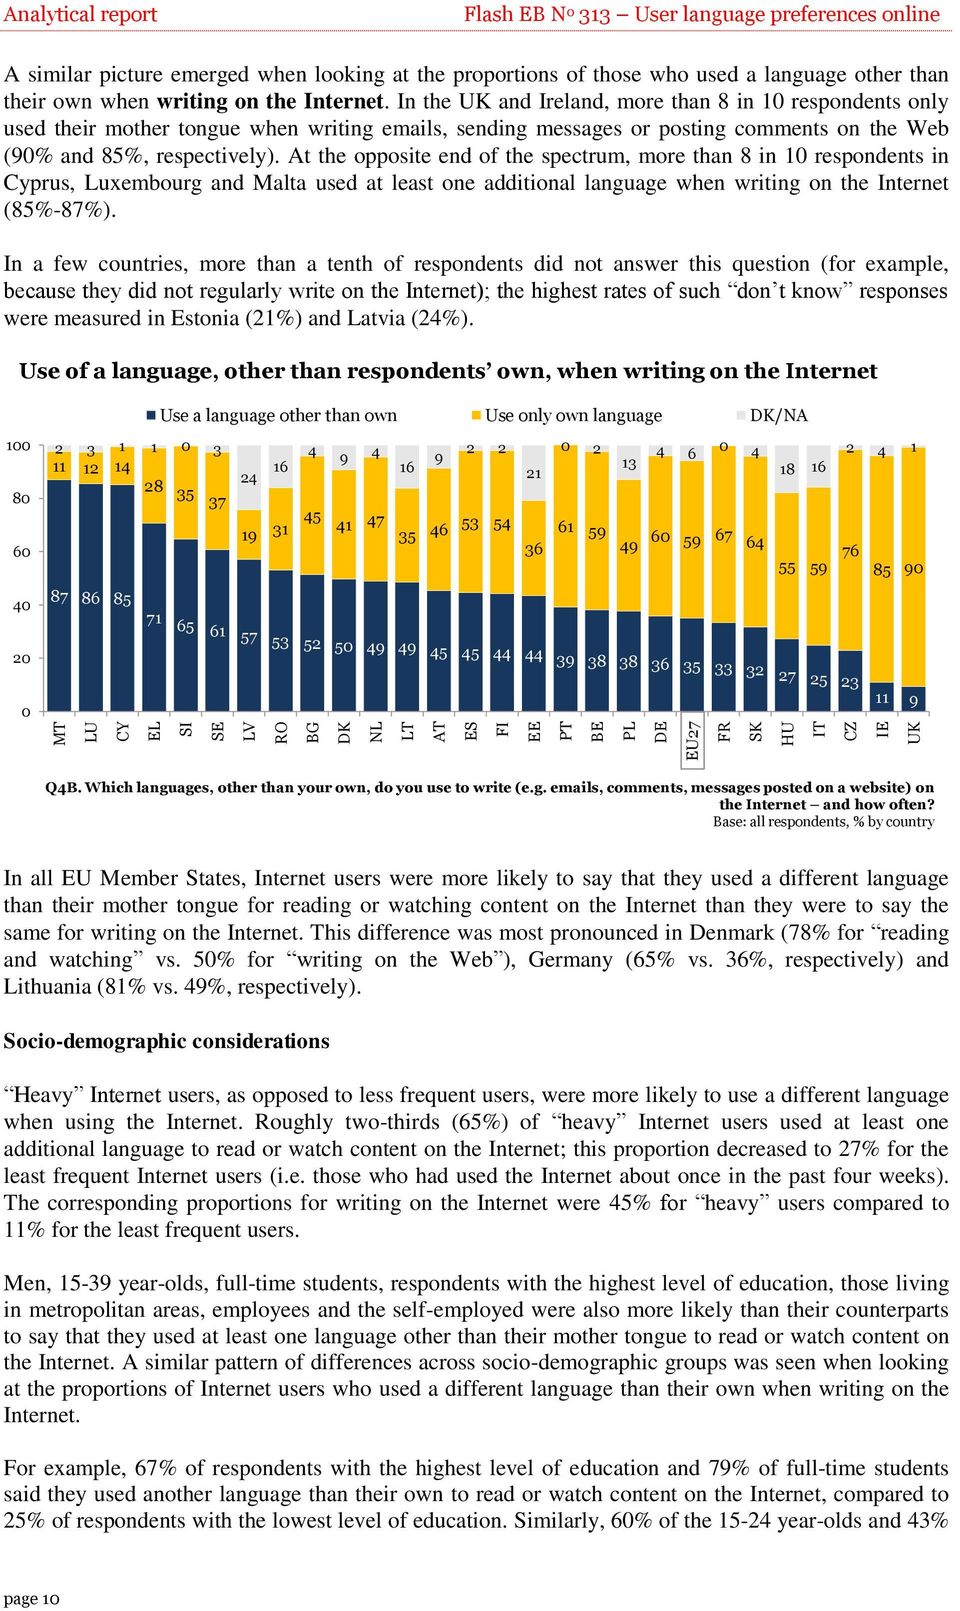 In the UK and Ireland, more than 8 in 10 respondents only used their mother tongue when writing emails, sending messages or posting comments on the Web (90 and 85, respectively).